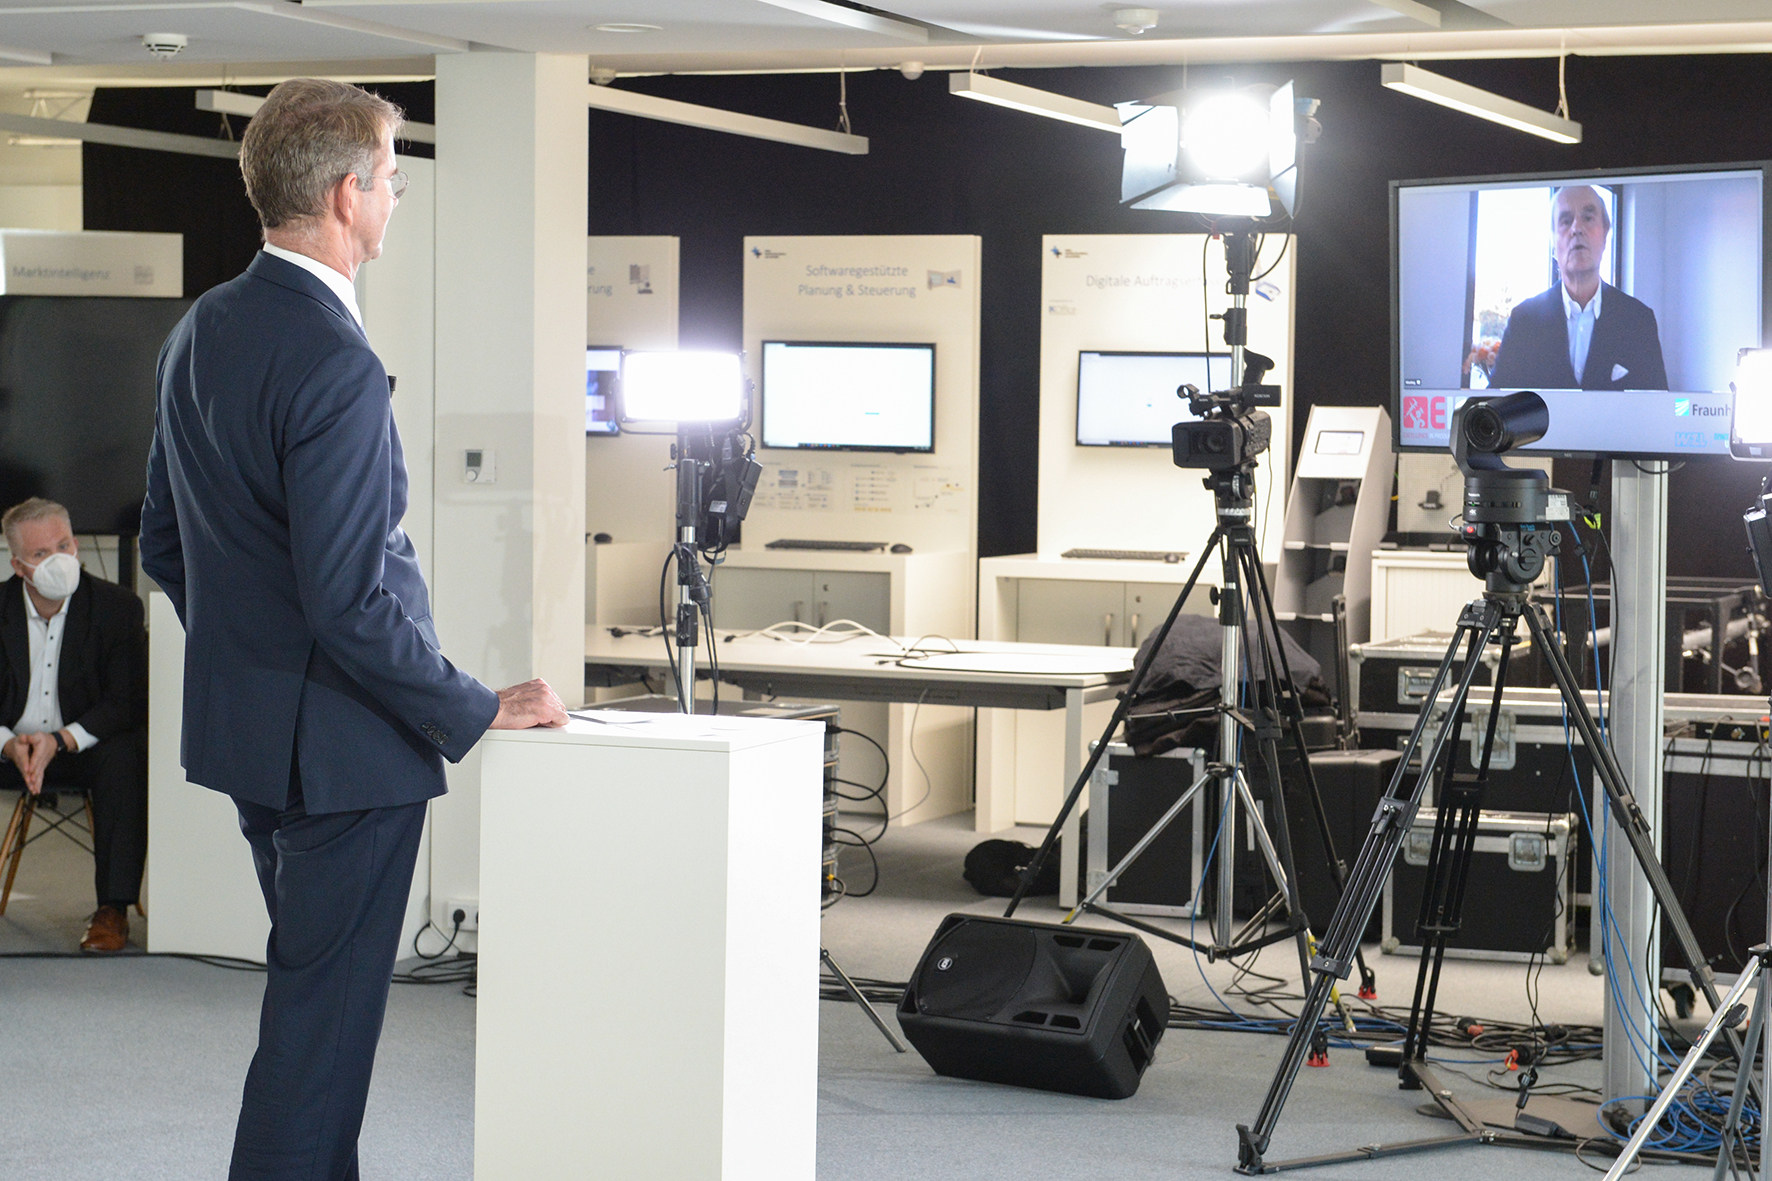 This year, the award ceremony for the Toolmaker of the Year was transmitted via livestream.